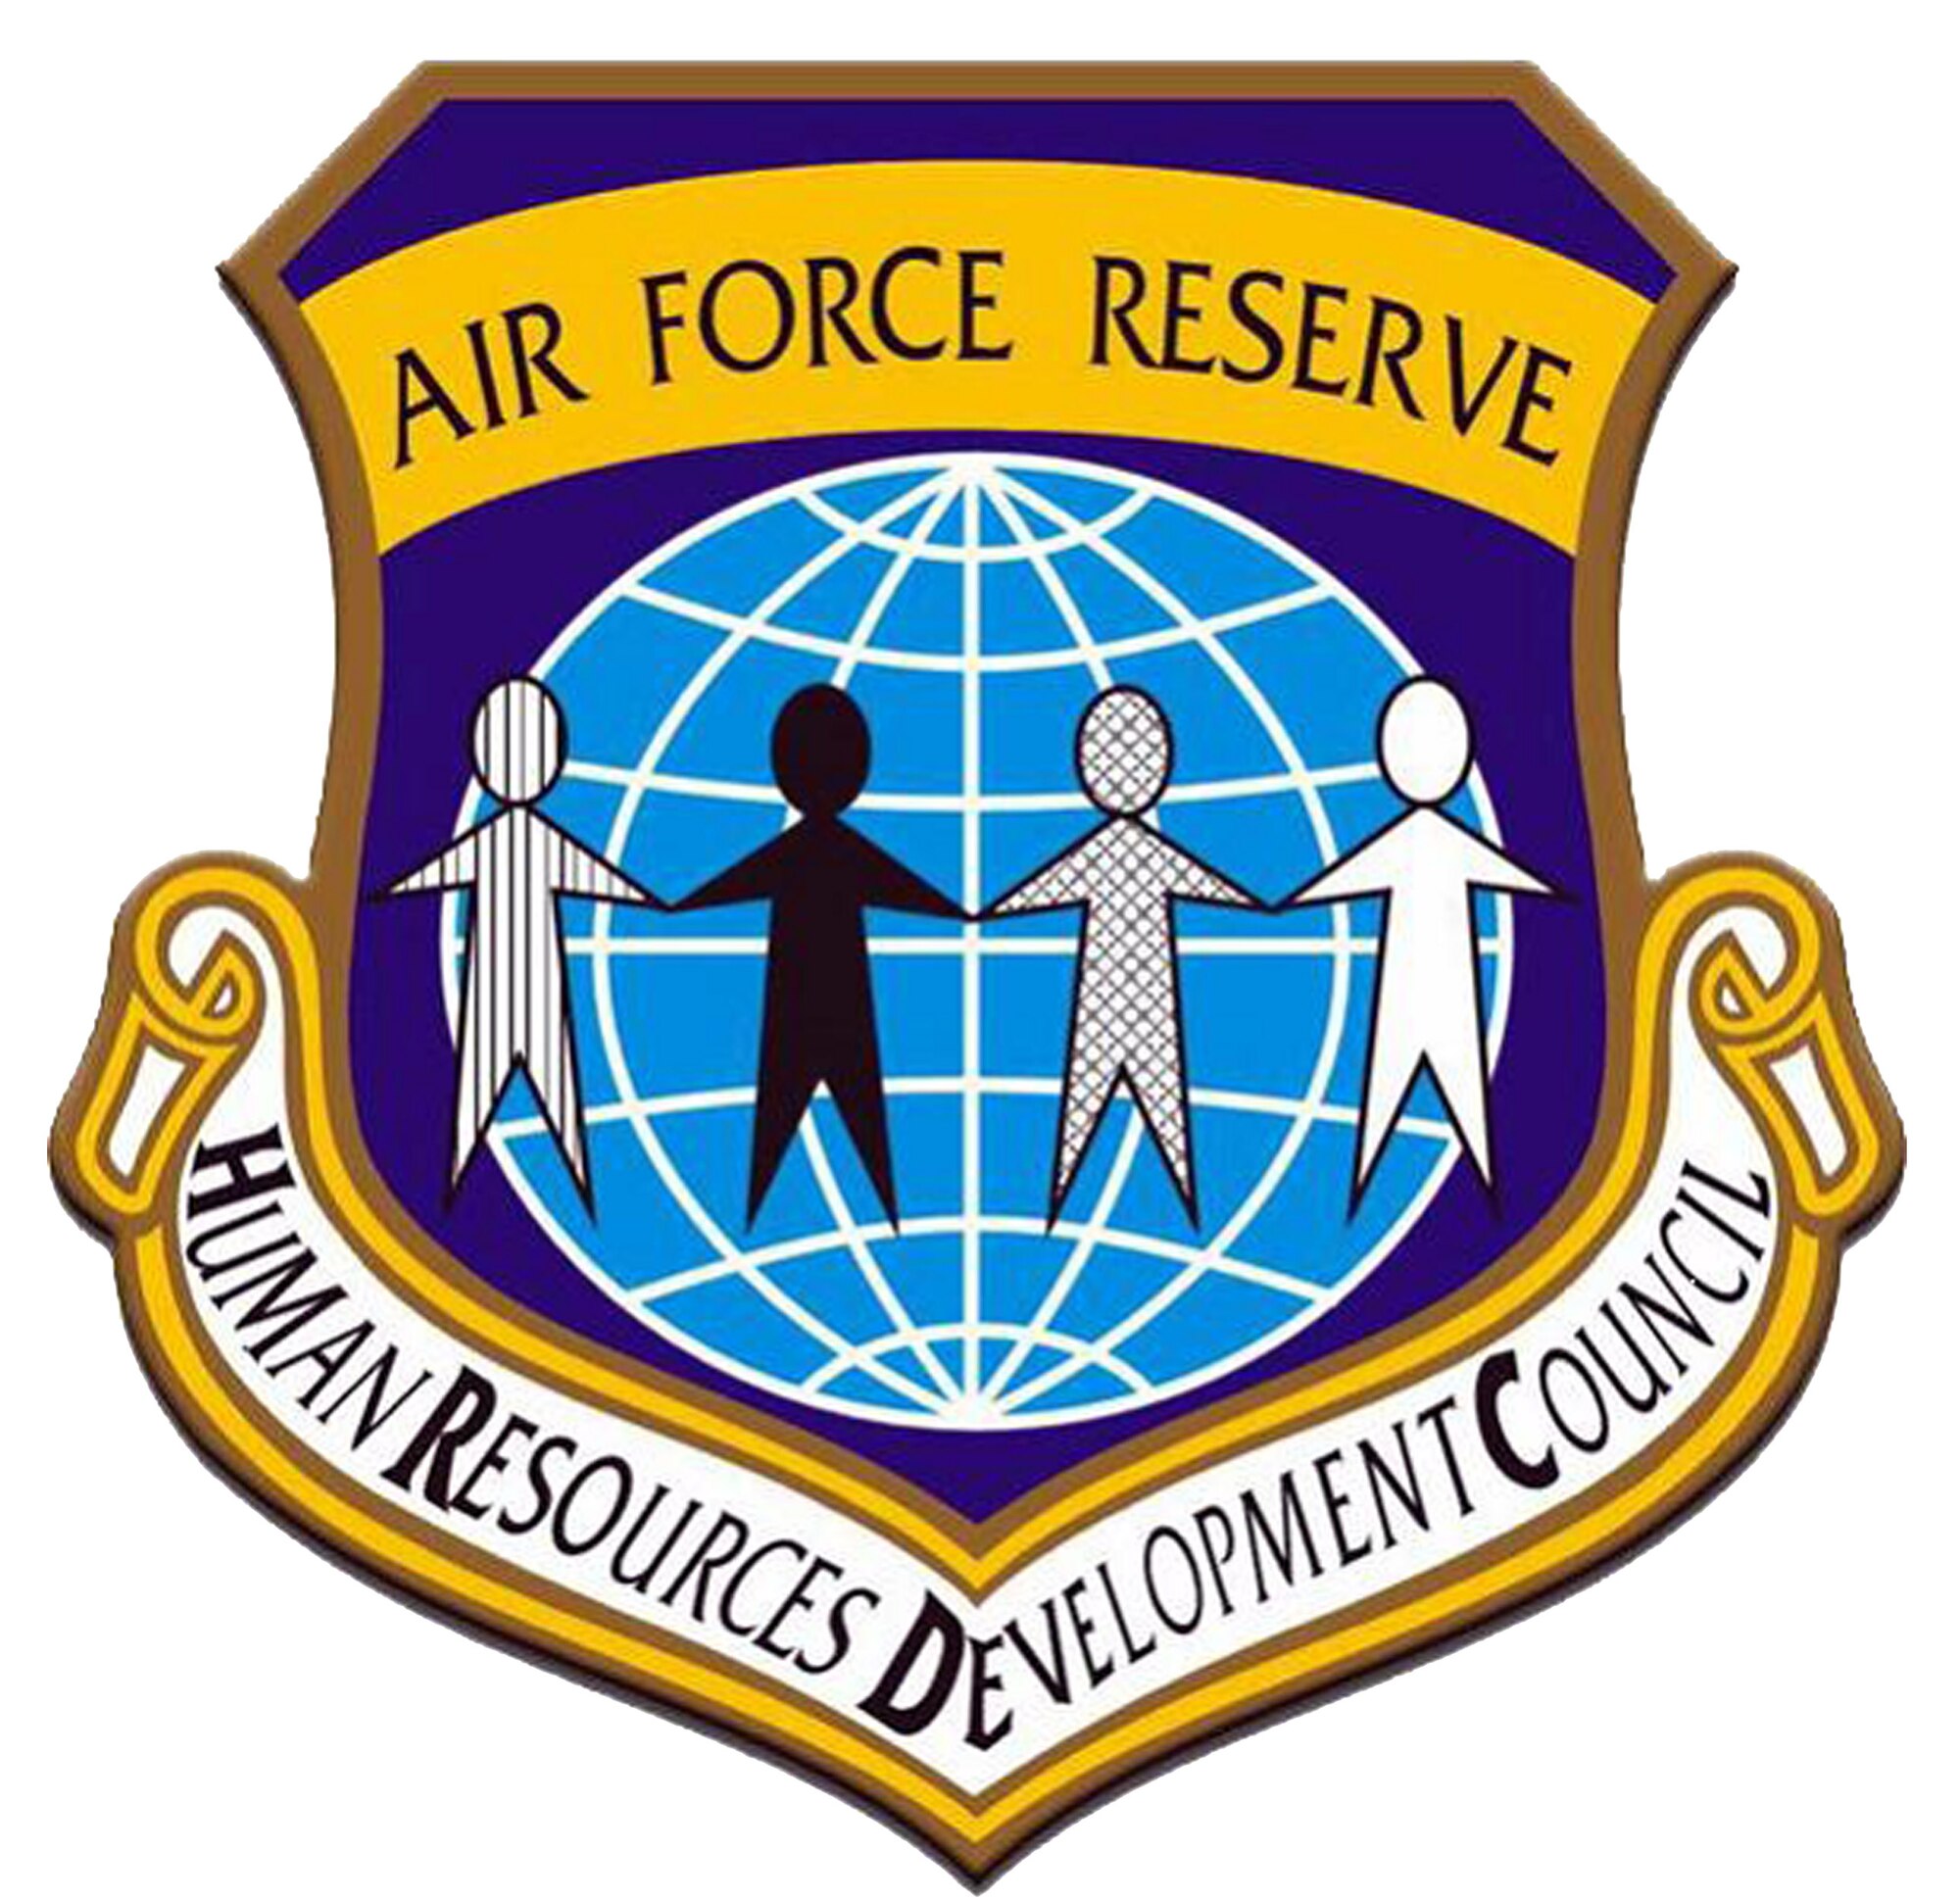 The Human Resources Development Council, sponsored by Air Force Reserve Command, aims to increase the diversity in organizations throughout the command. (U.S. Air Force graphic)